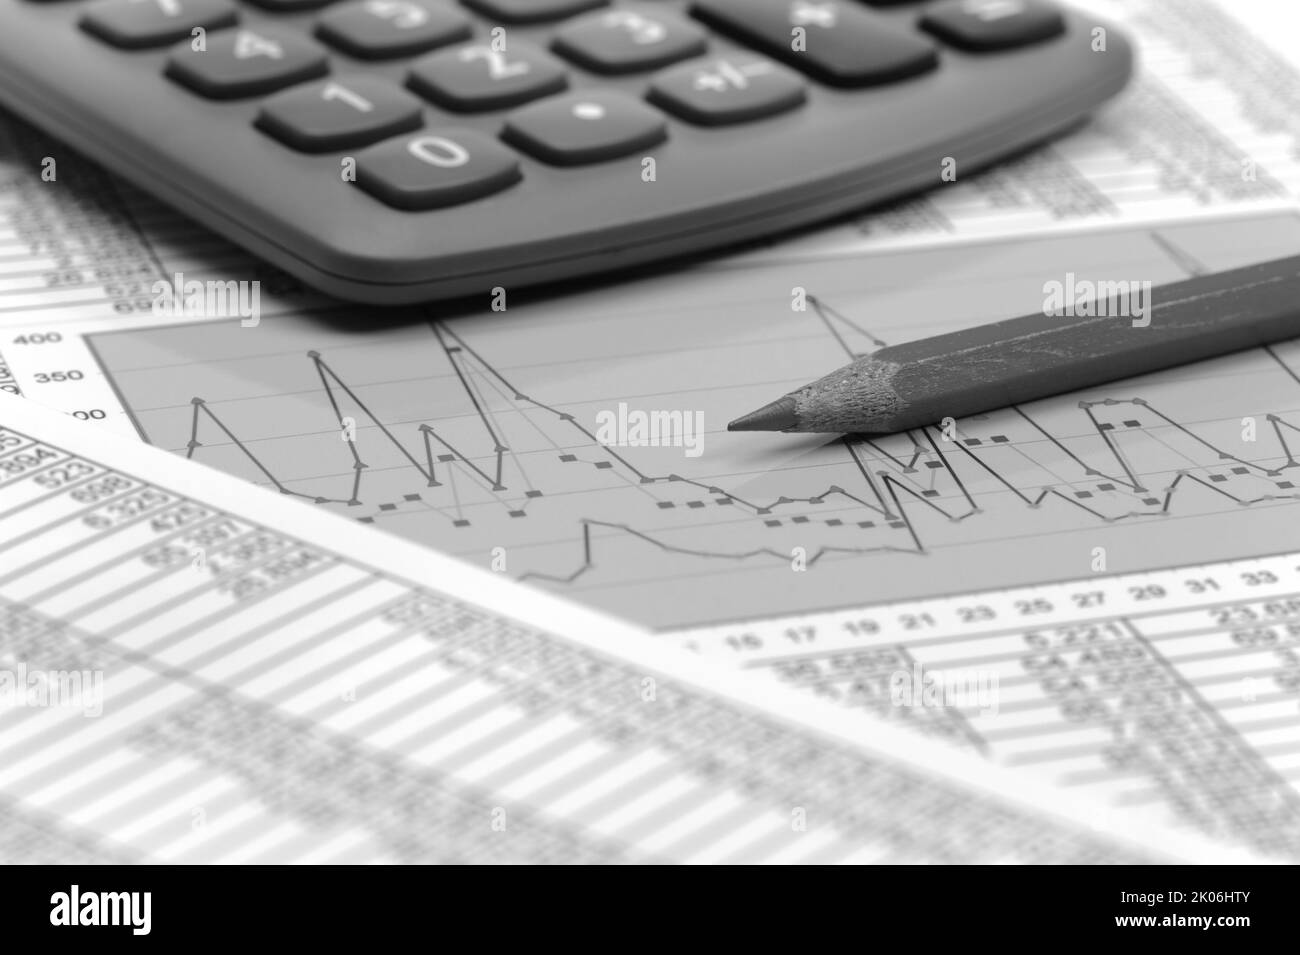 finance and economy with chart Stock Photo